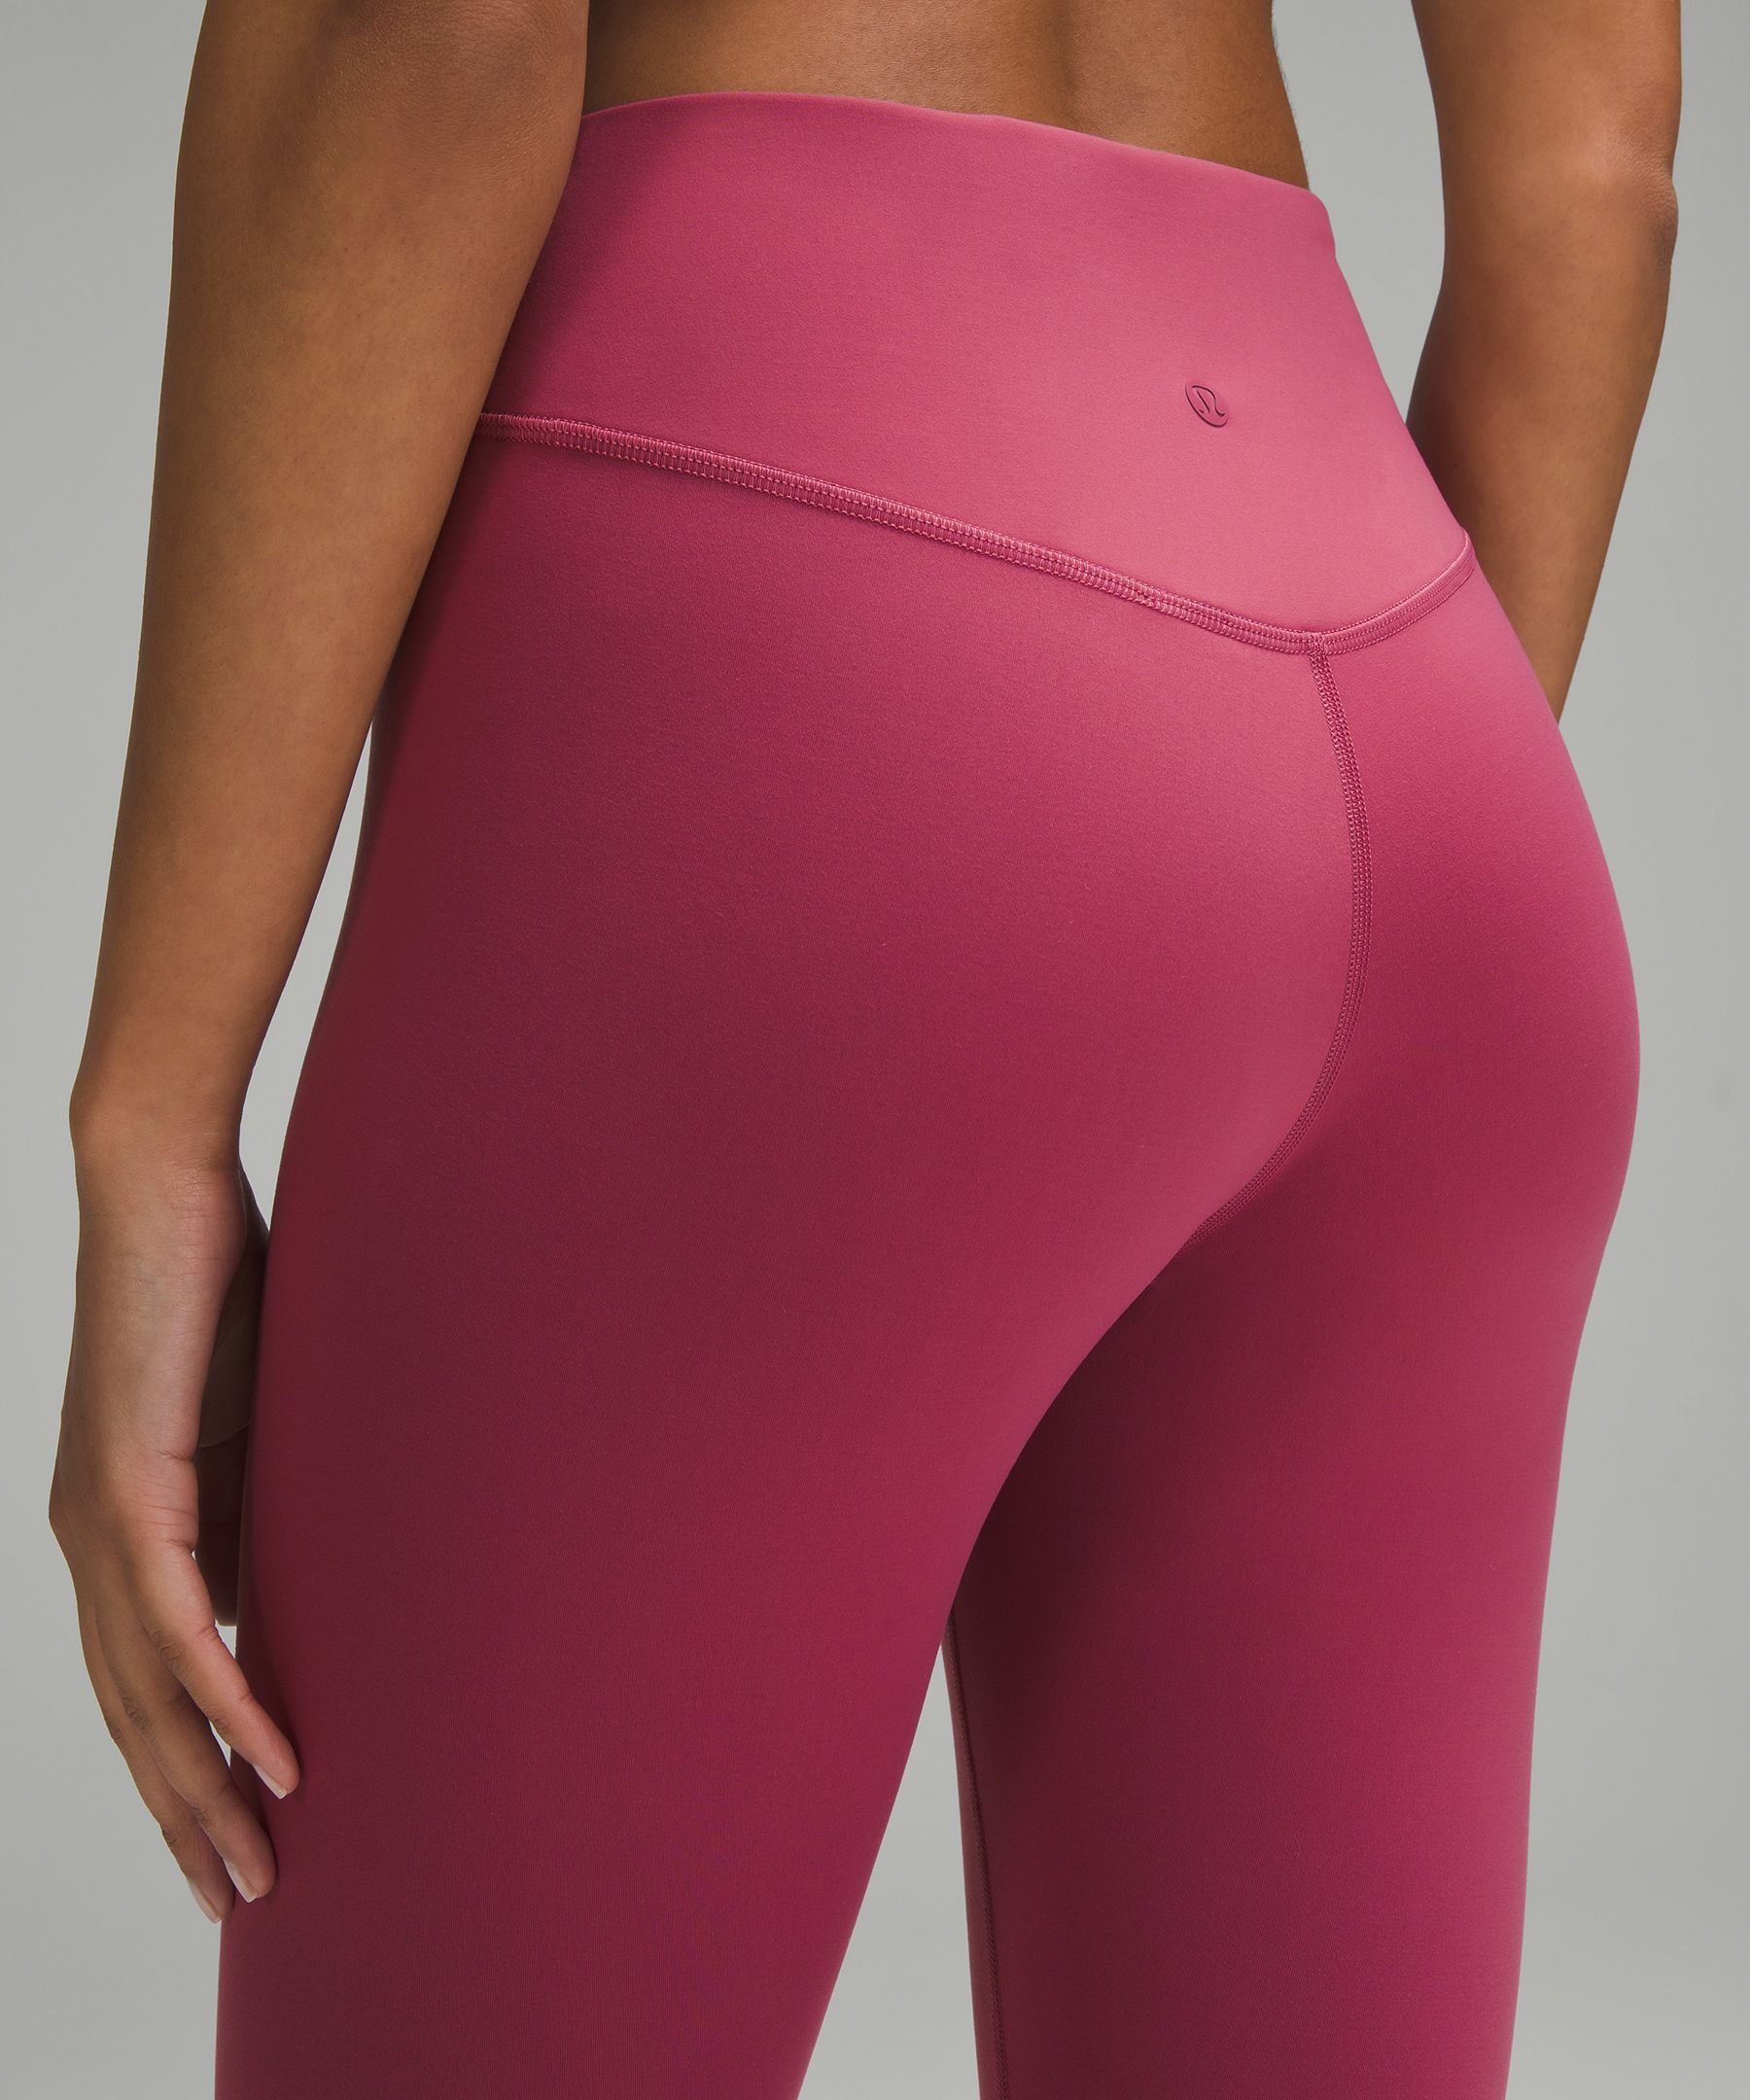 lululemon - In case you missed it—your yoga, spin, barre and everyday  tights got a breezy upgrade. Special Edition Wunder Unders are here (and  not for long). Get yours